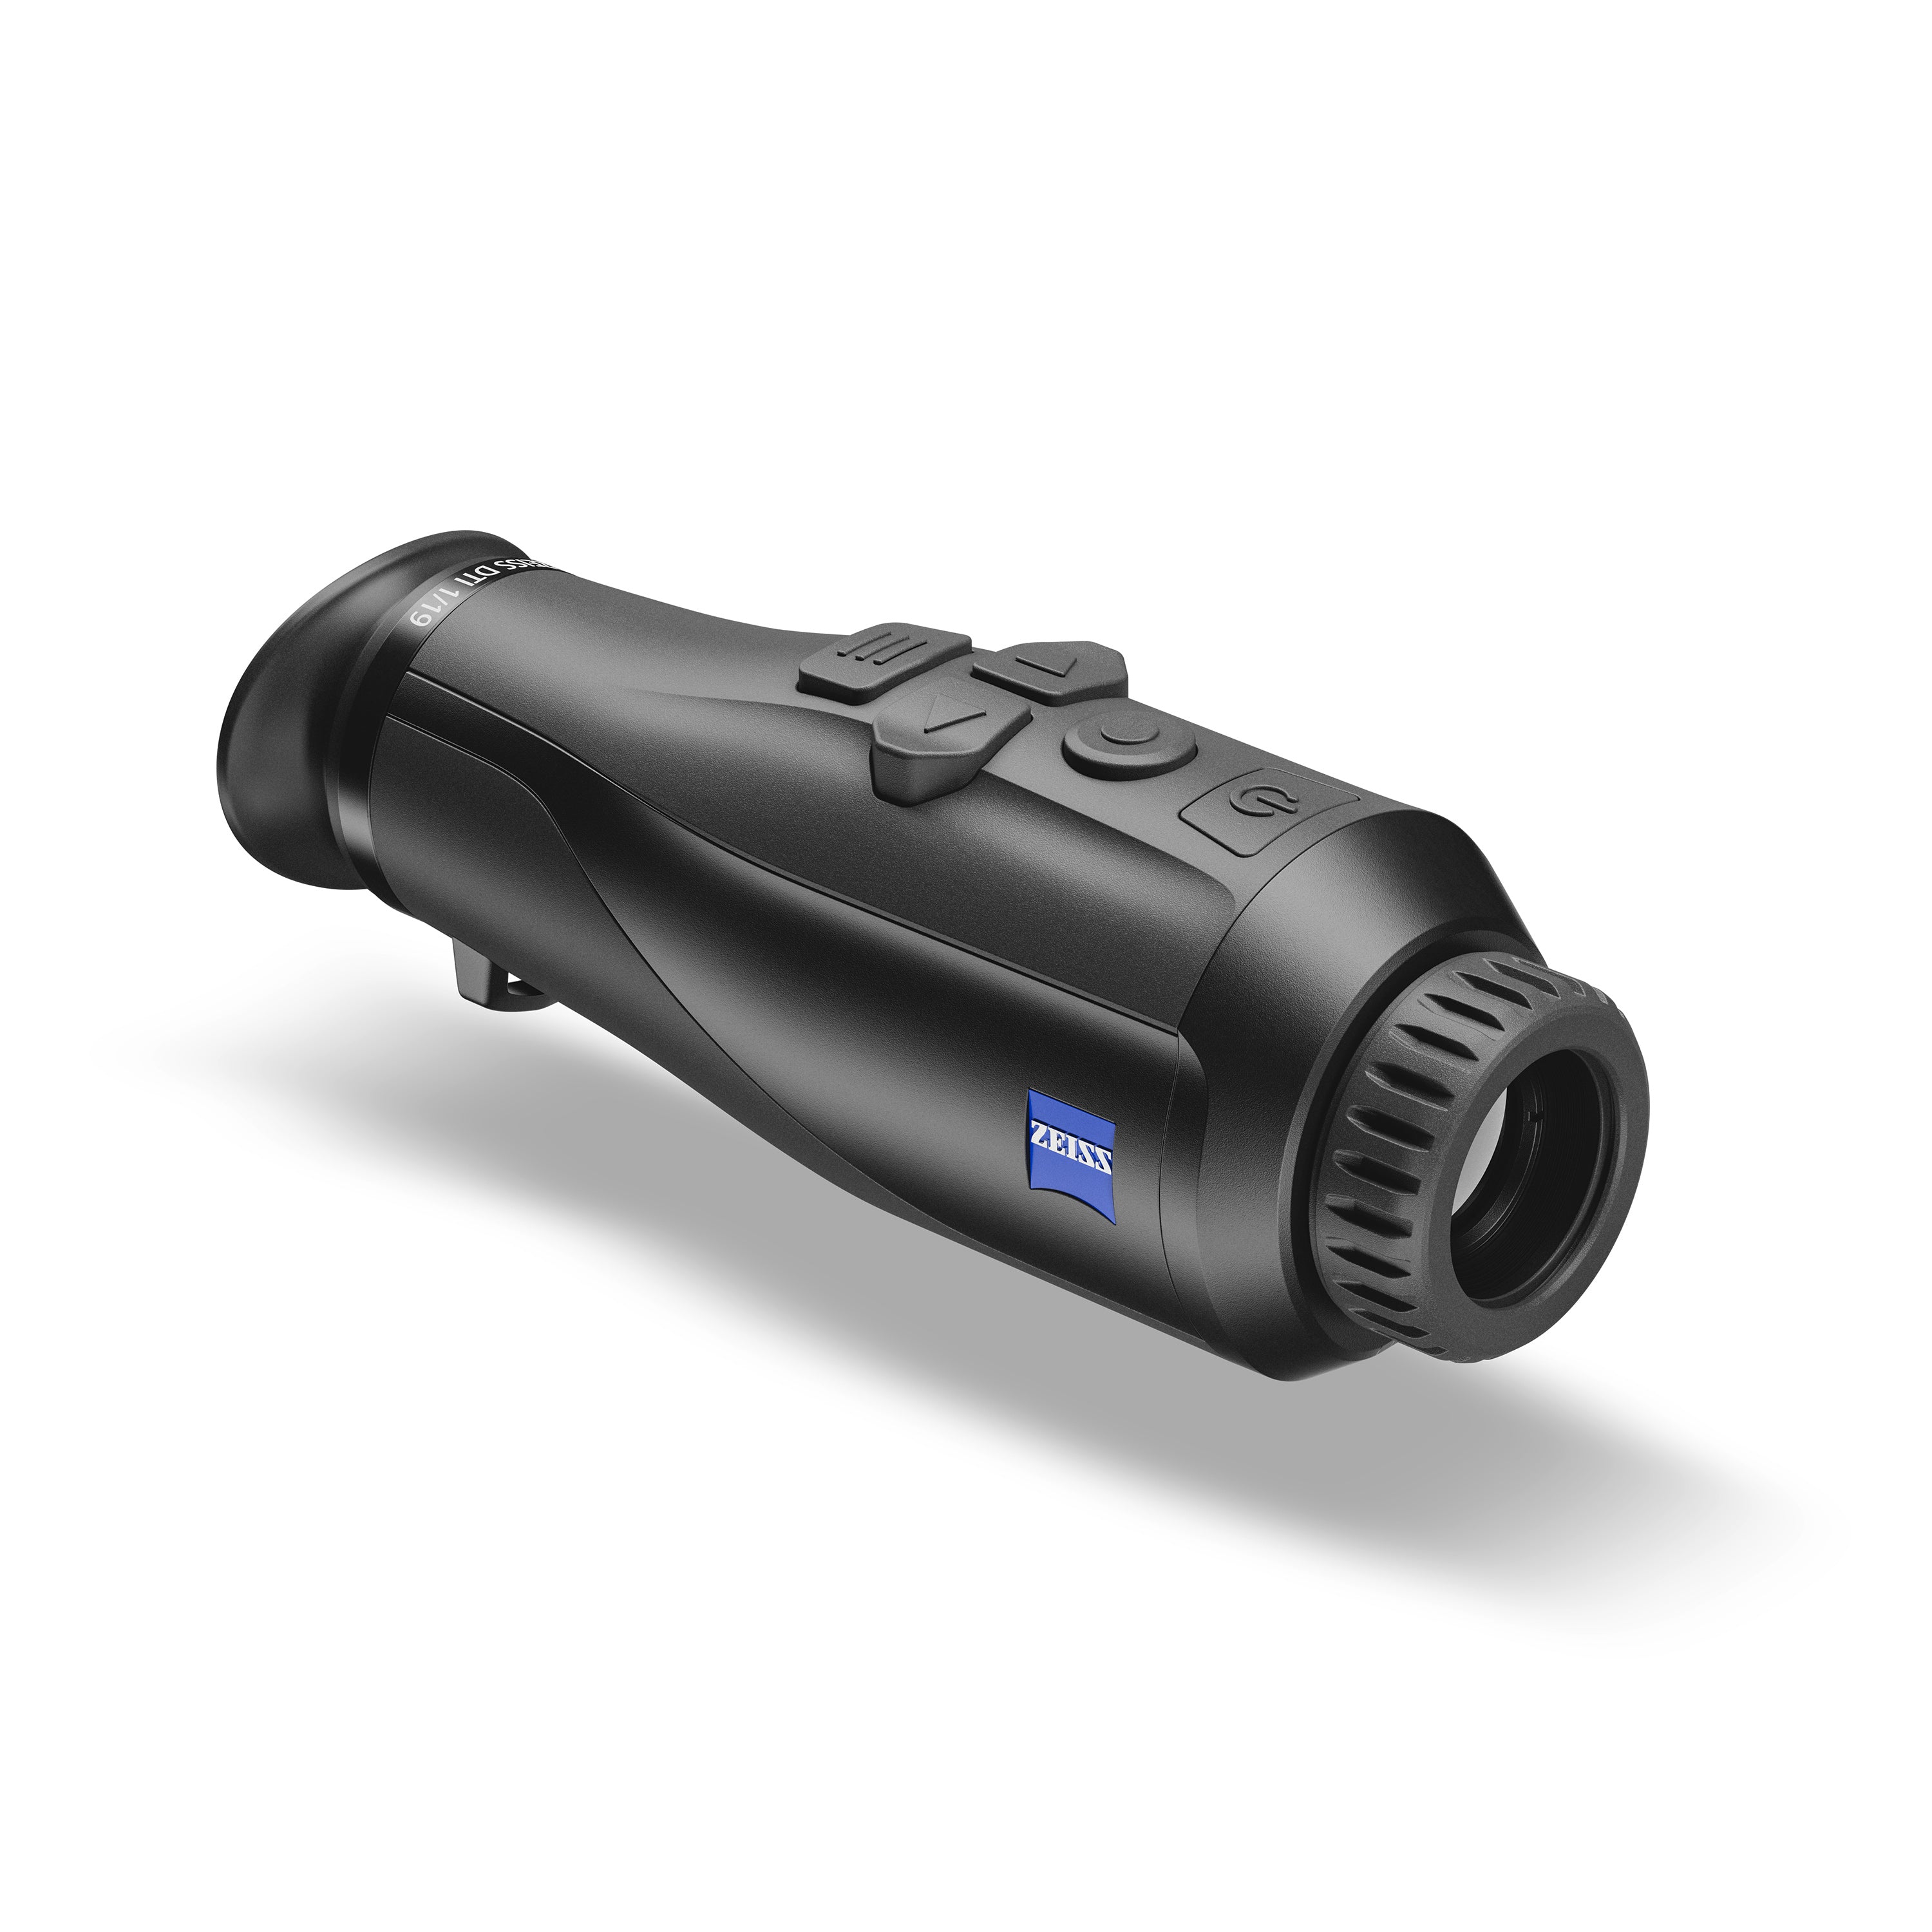 Zeiss DTI 1 Thermal Imaging Camera High-Resolution Monocular for Hunting and Wildlife Observation